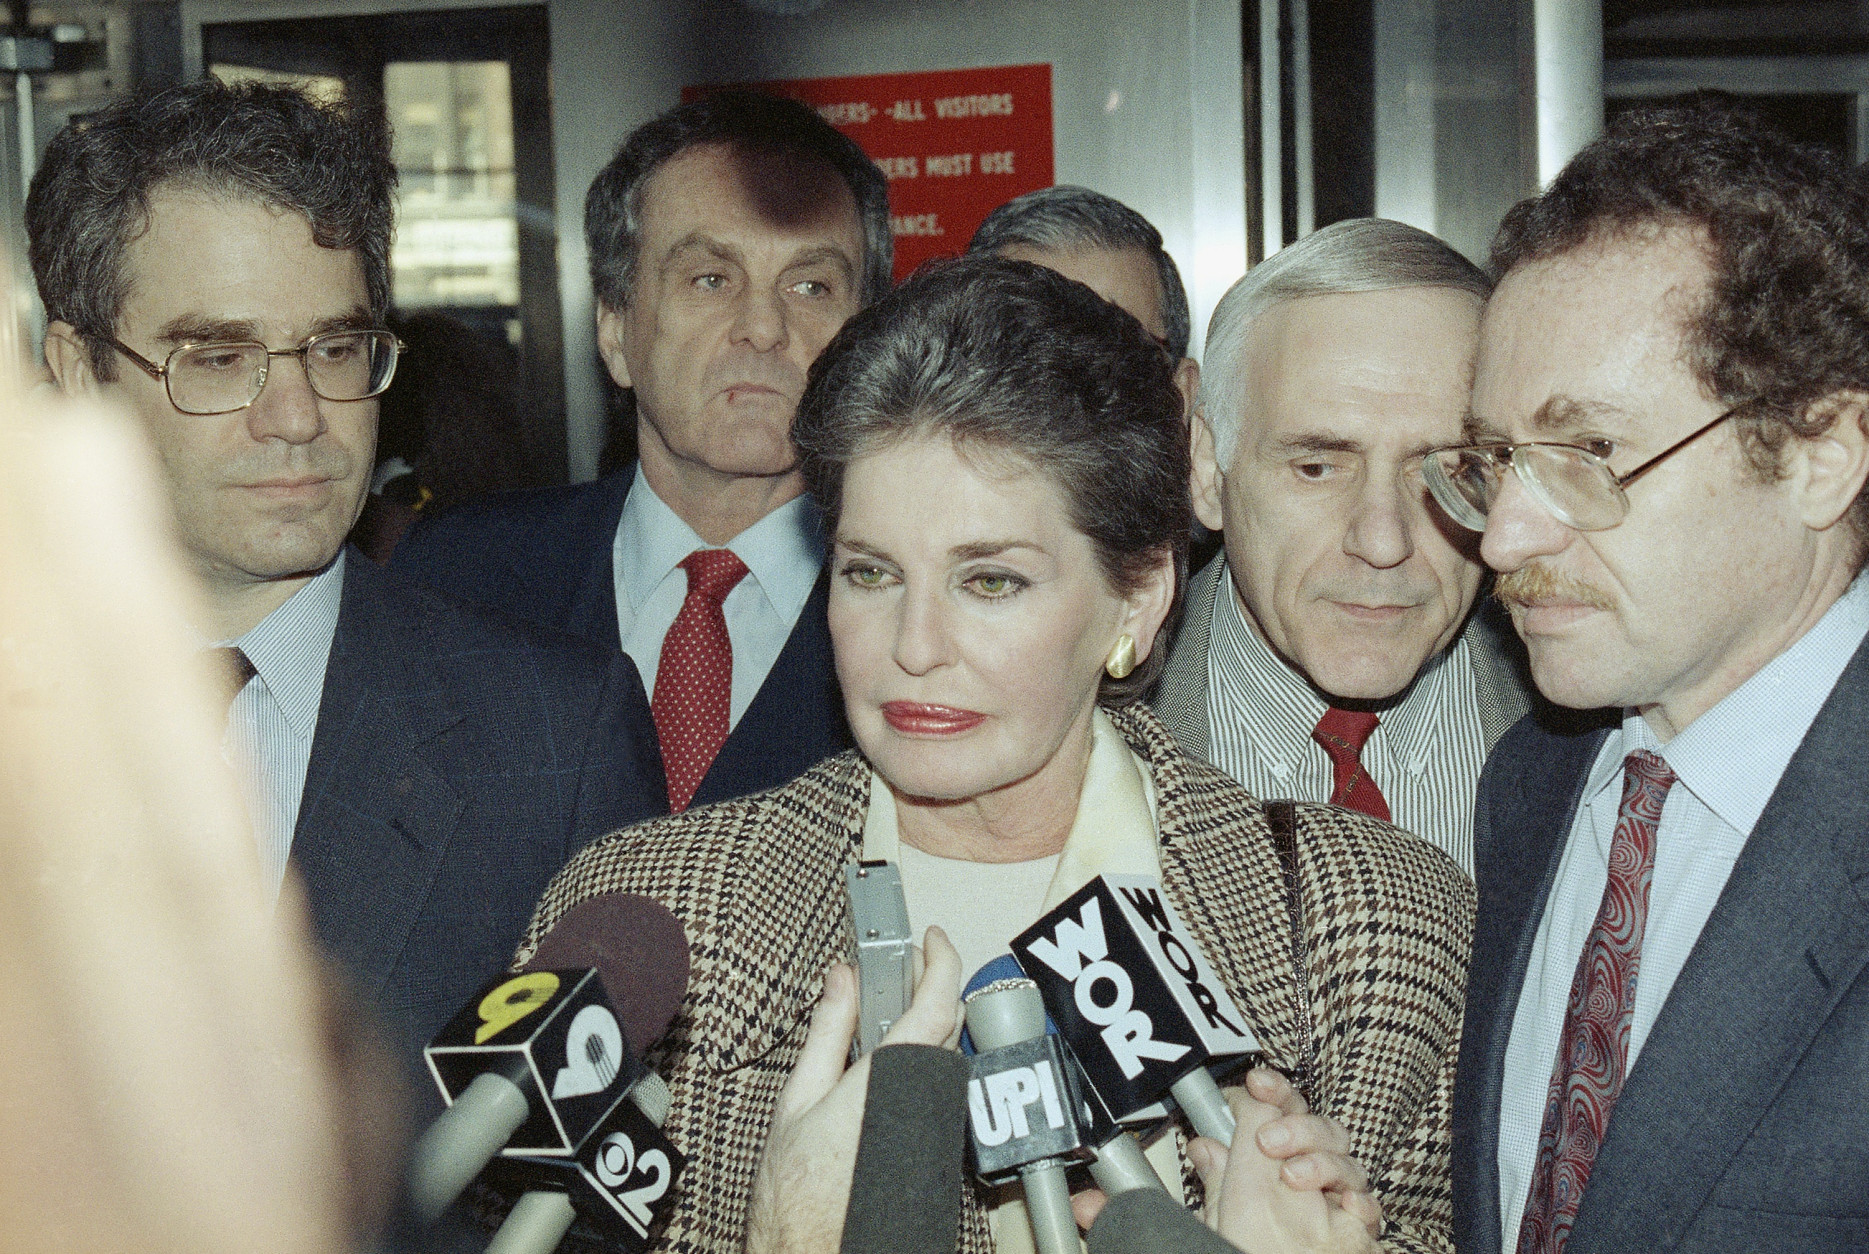 Leona Helmsley, New York City hotel owner meets with the press in the 1990 photo.   Helmsley was convicted of federal income tax evasion in 1989 and she served 19 months in prison.   She was married to Harry Helmsley,  a multi-millionaire real estate investor.   Together, the Helmsleys focused on their hotel empire.  (AP Photo)